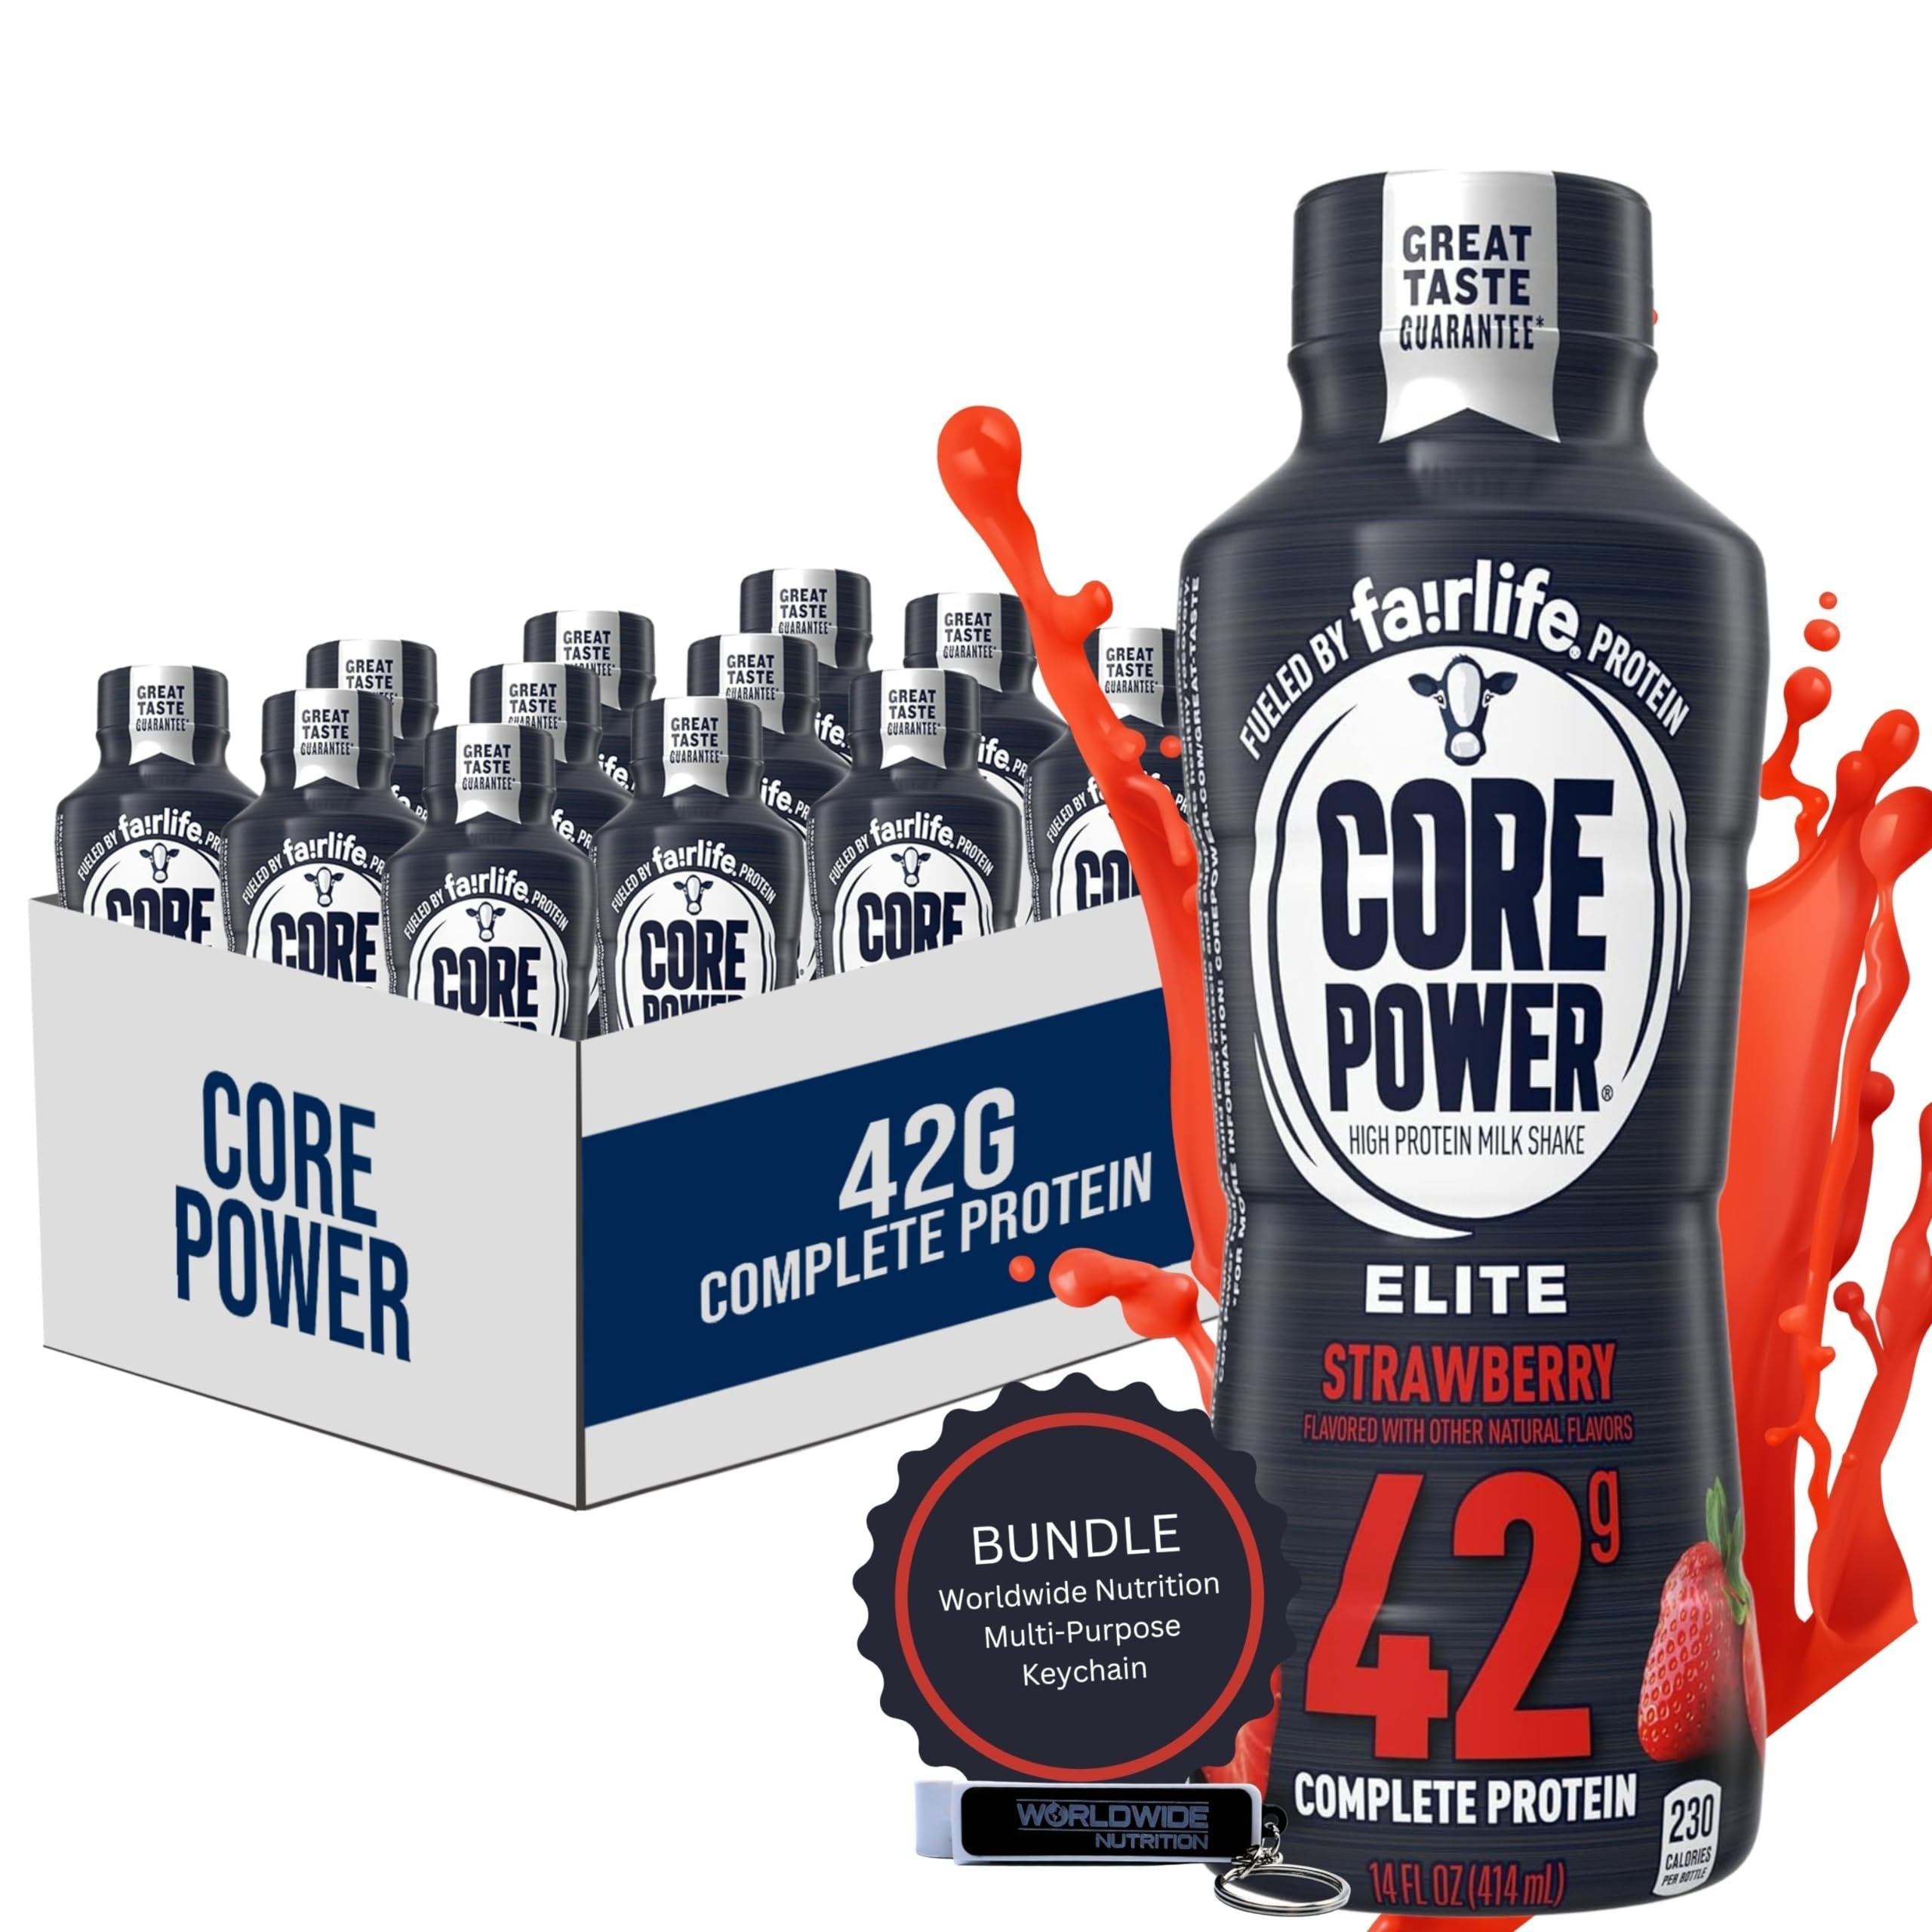 Core Power Elite High Protein Shake with 42g Protein by fairlife Milk,  Chocolate, 14 fl oz